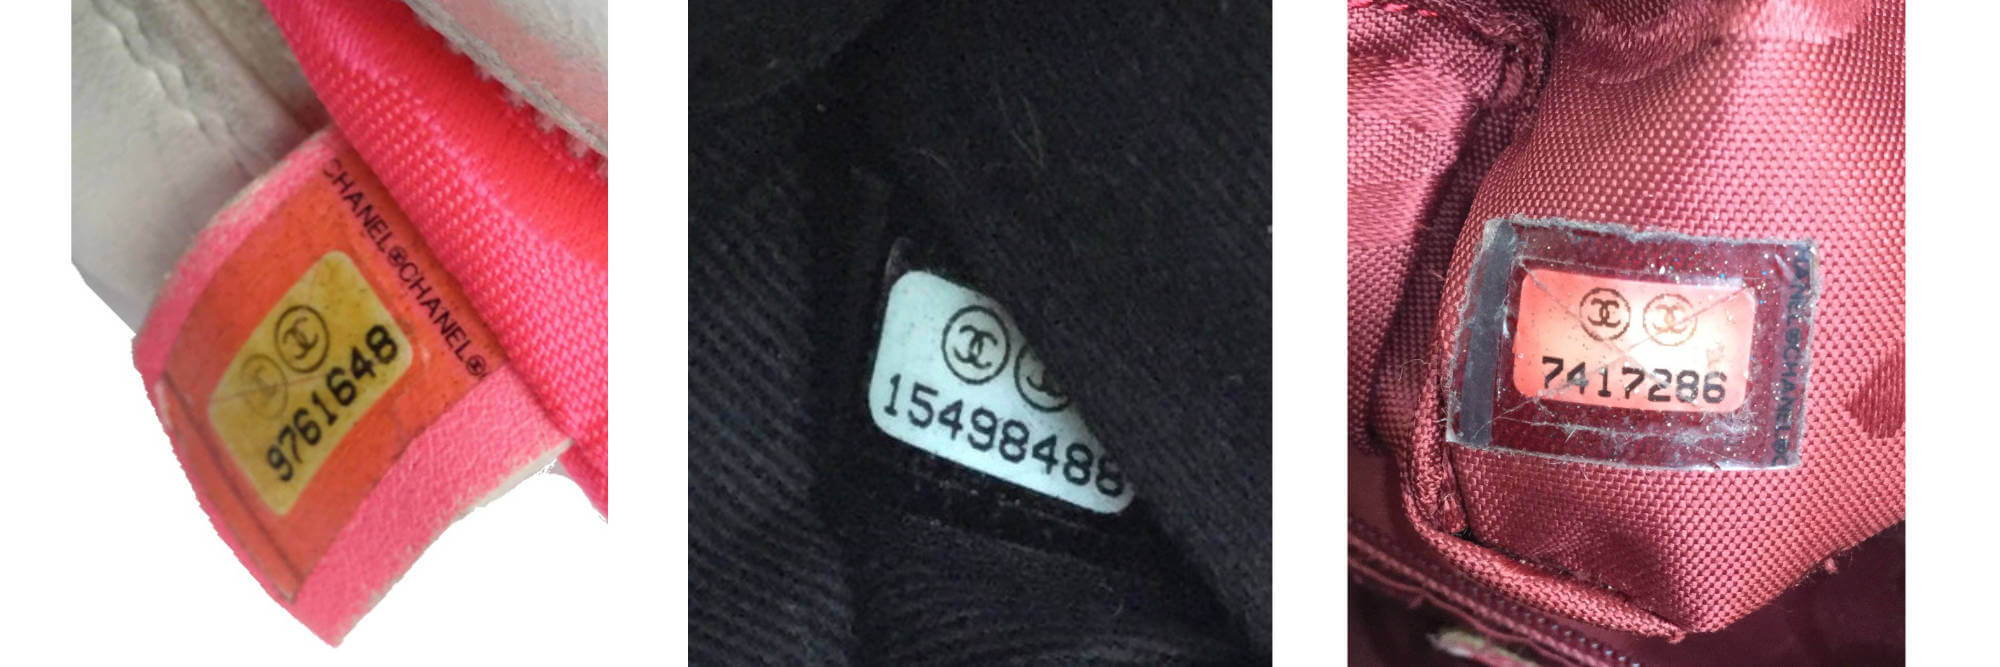 Authentic Chanel Bag Date Codes